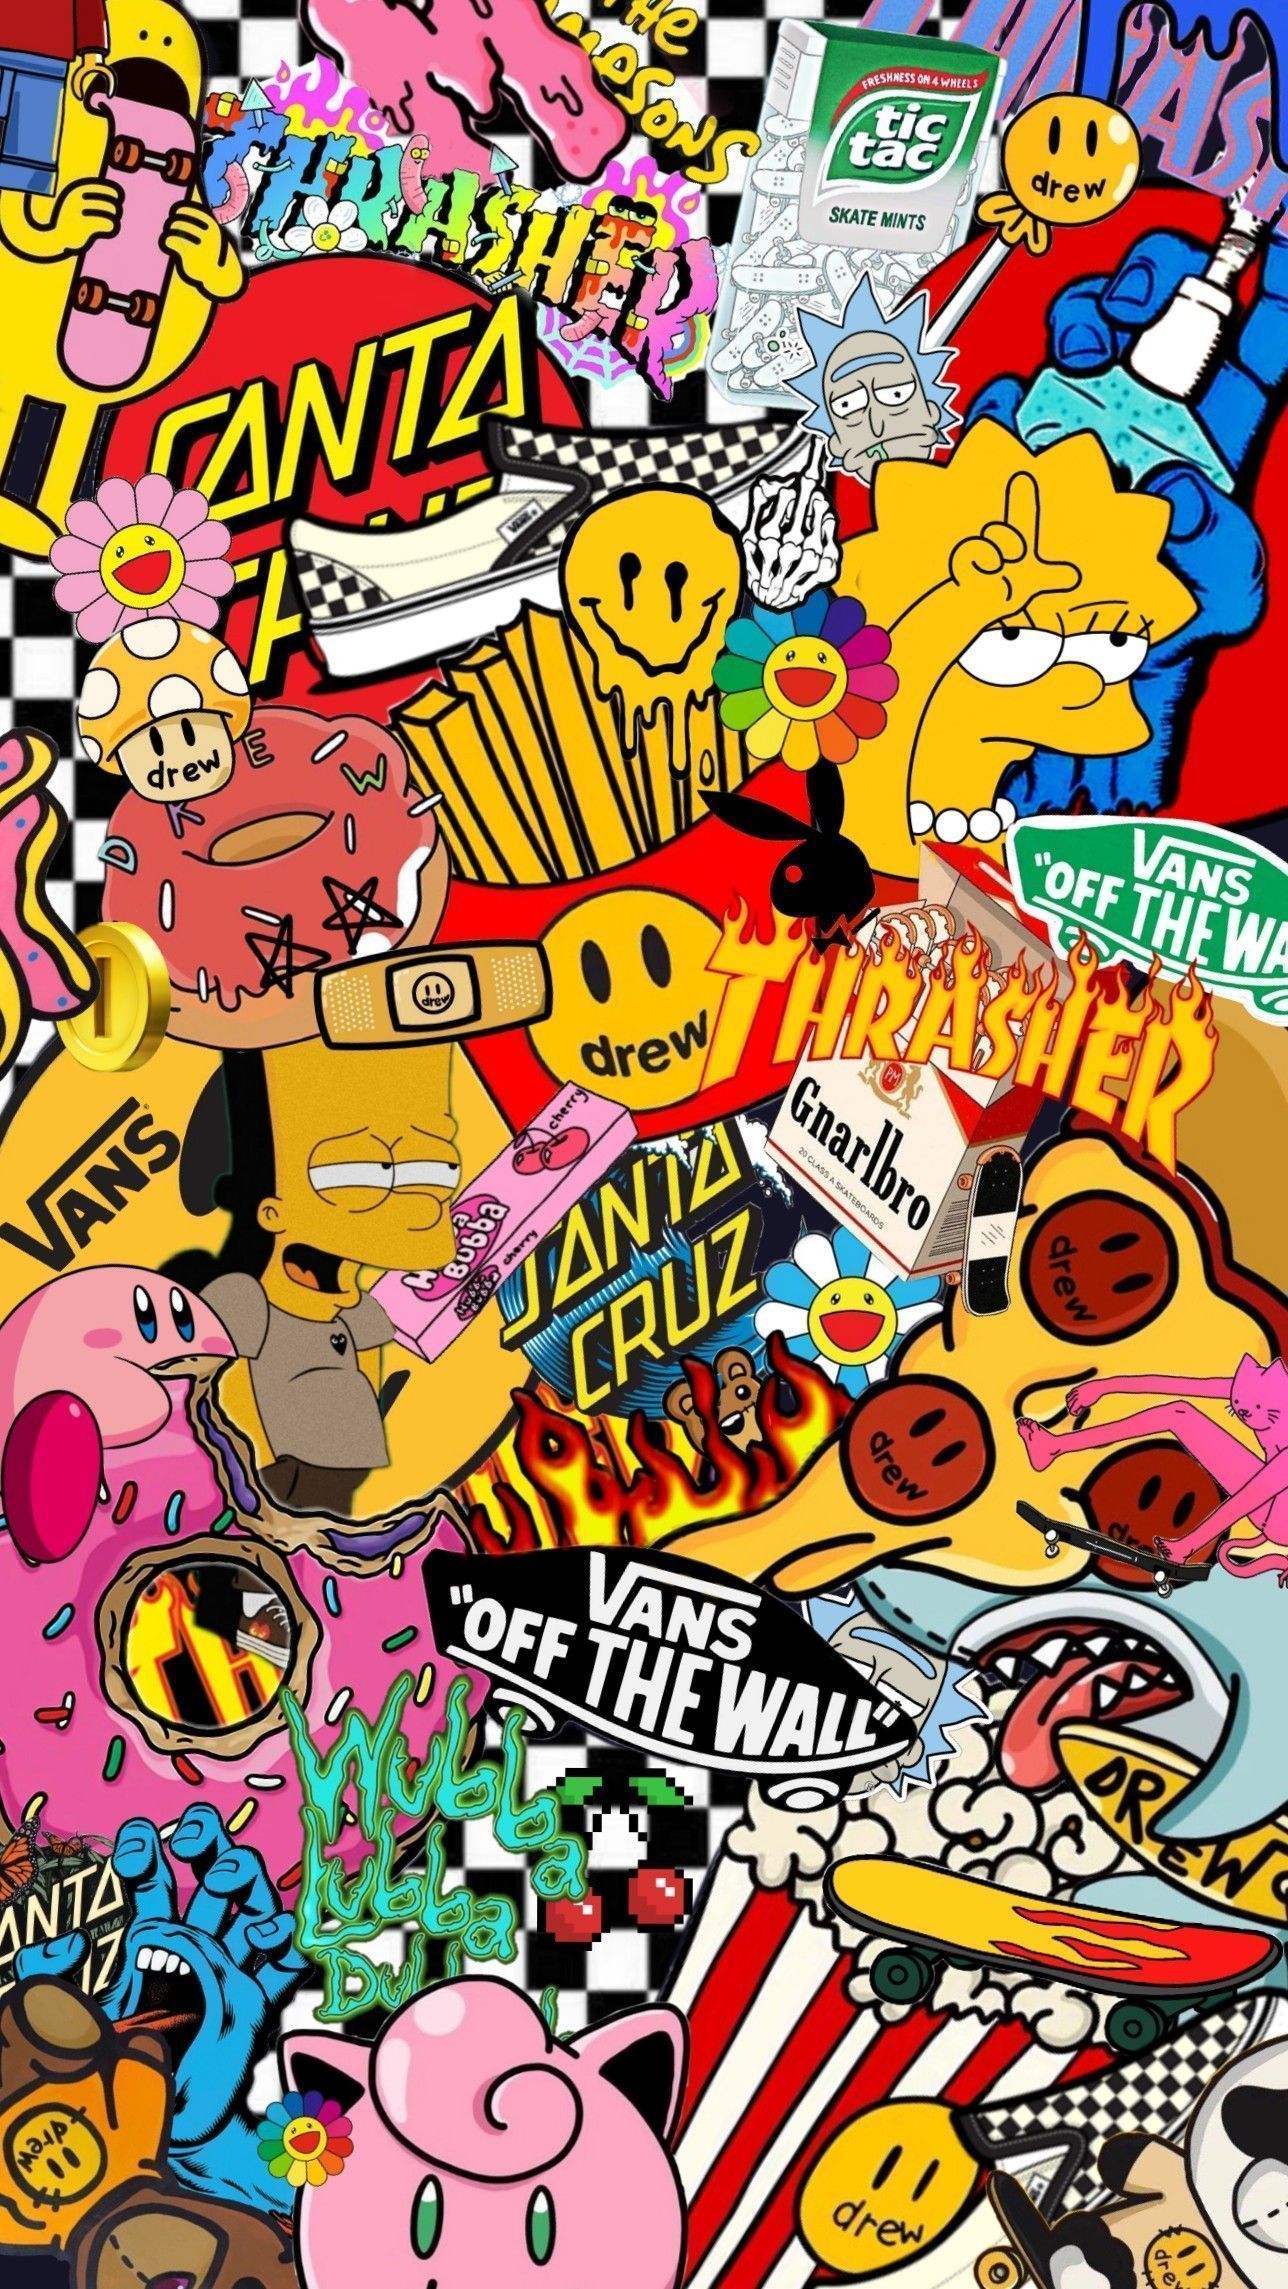 A colorful sticker poster with various stickers such as vans, off the wall, and santa cruz. - Vans, skate, Pokemon, skater, The Simpsons, collage, graffiti